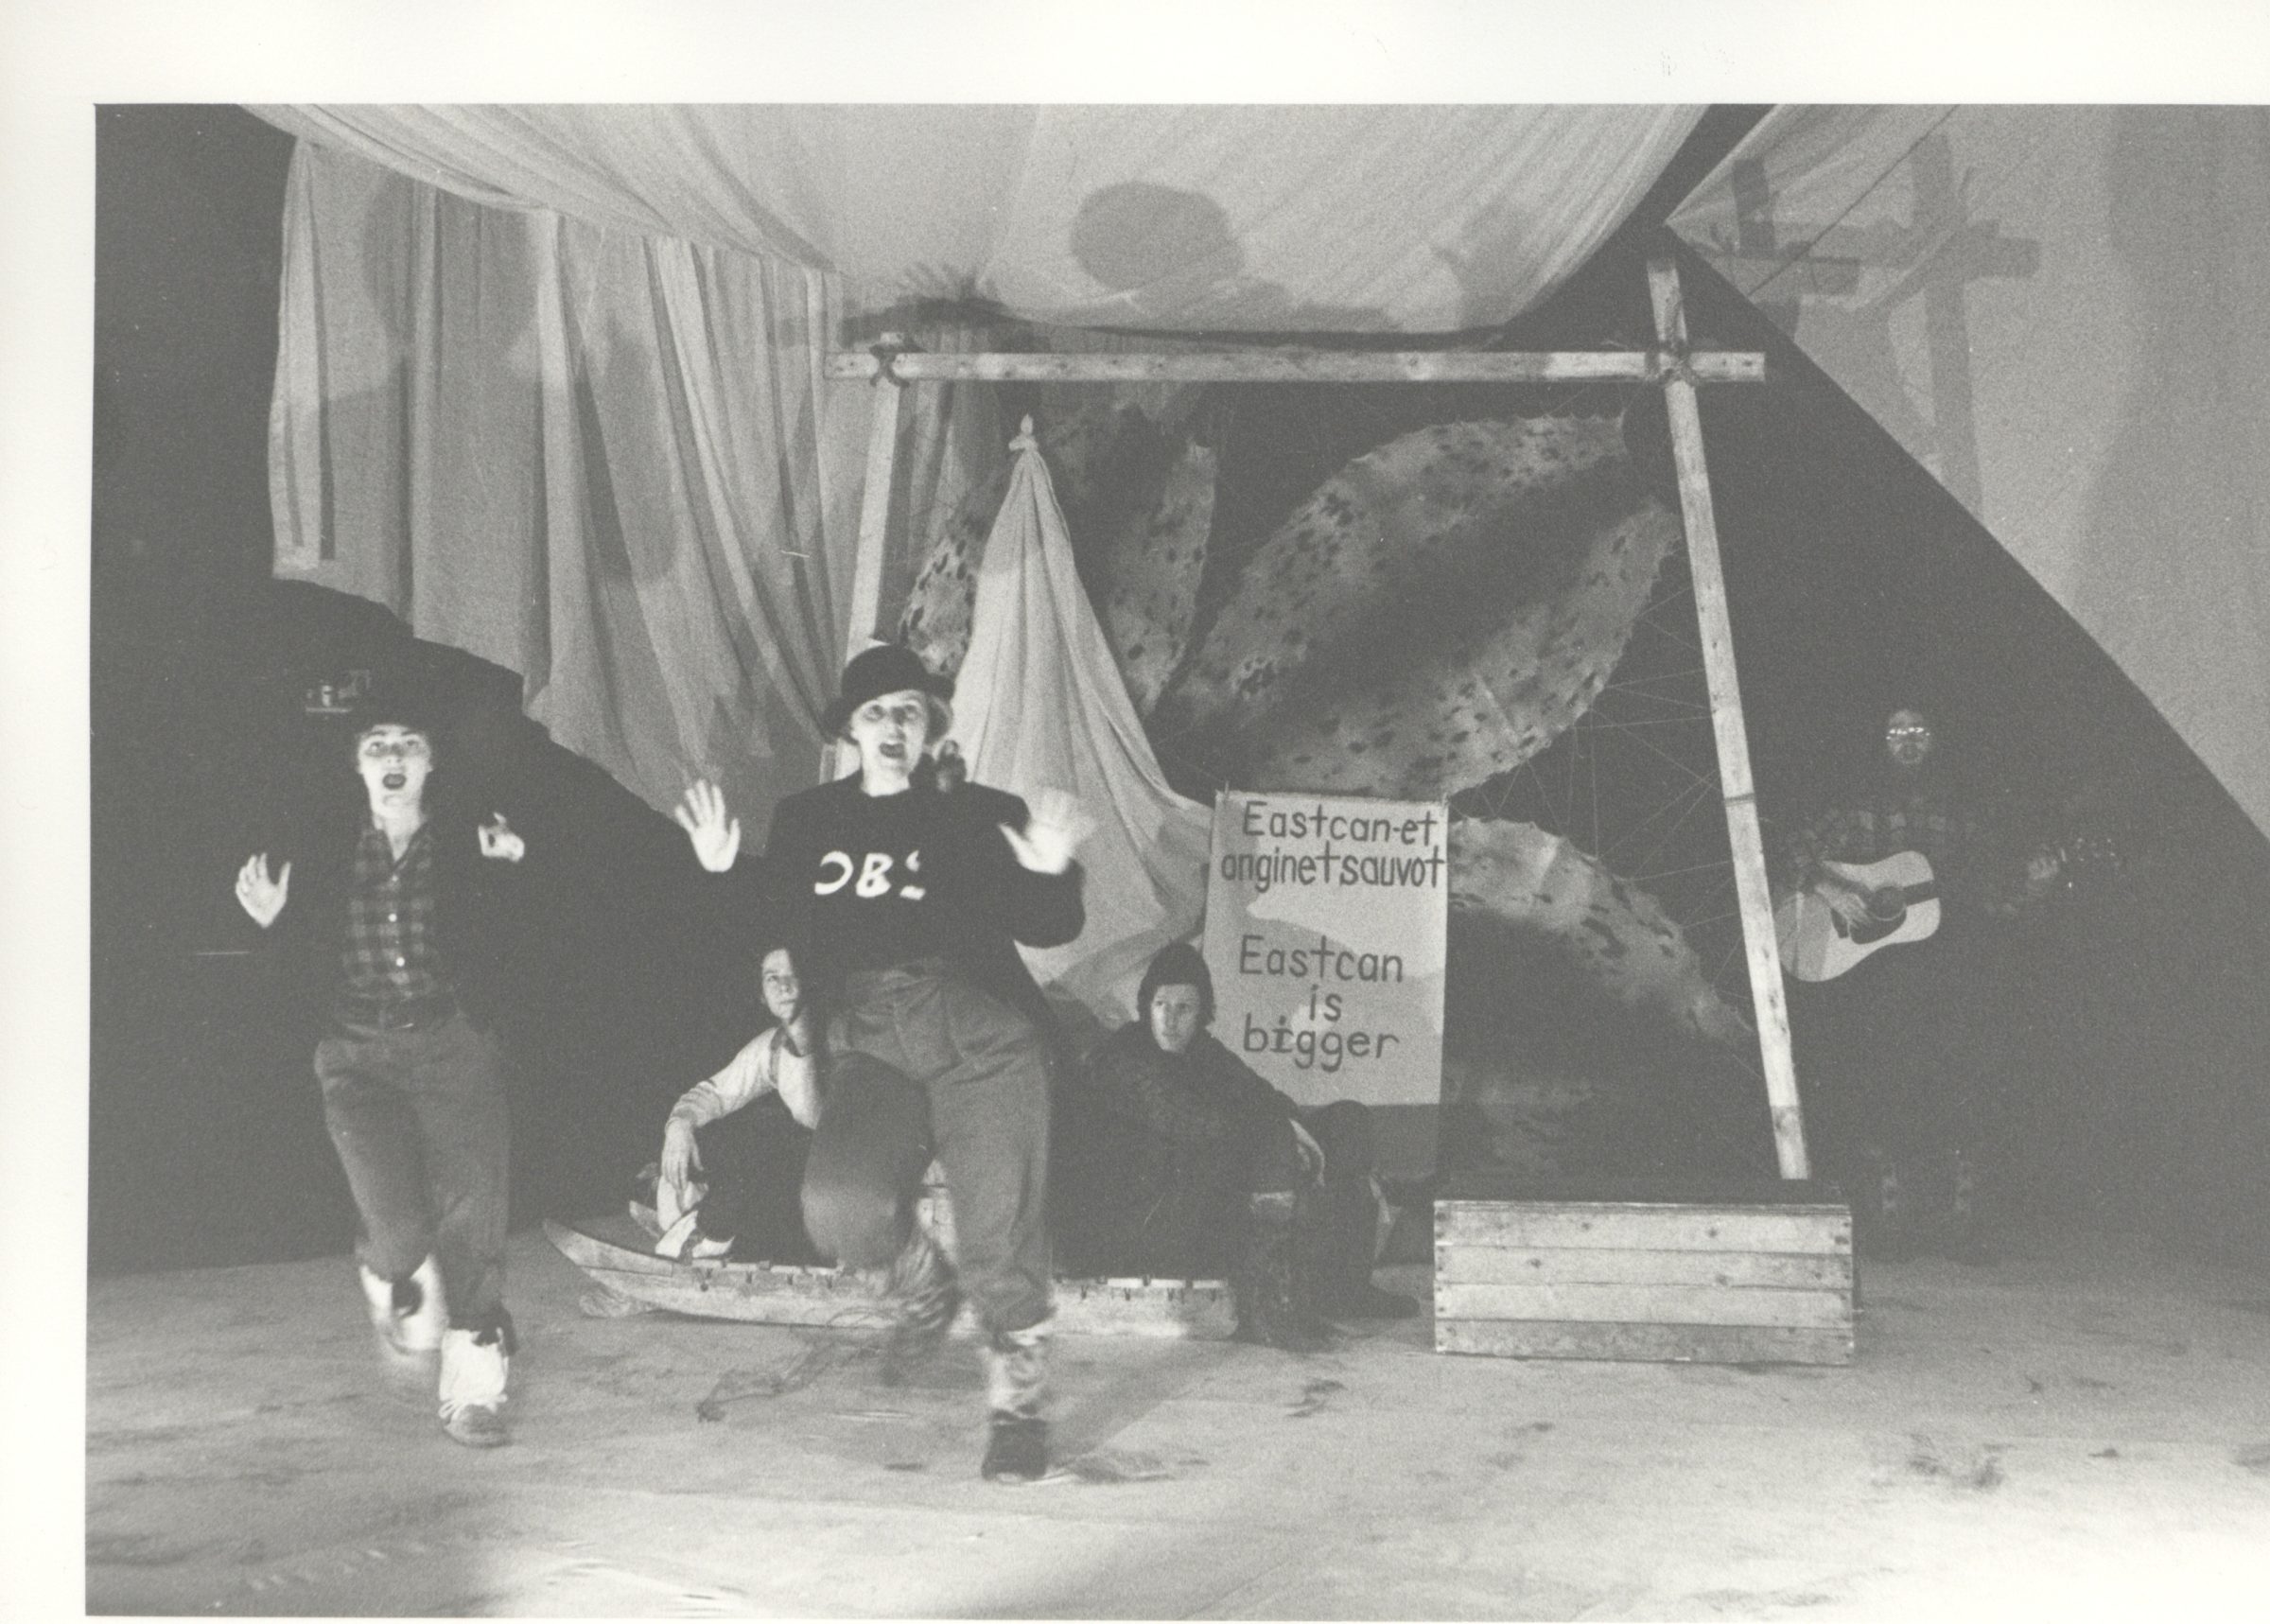 A black and white photo of two people moving with their hands up and mouths open as if singing. Two people sit behind them on a sled. Seal skins are stretched out in a frame behind the sled. A sign says Eastcan-et anginetsauvot Eatcan is bigger.